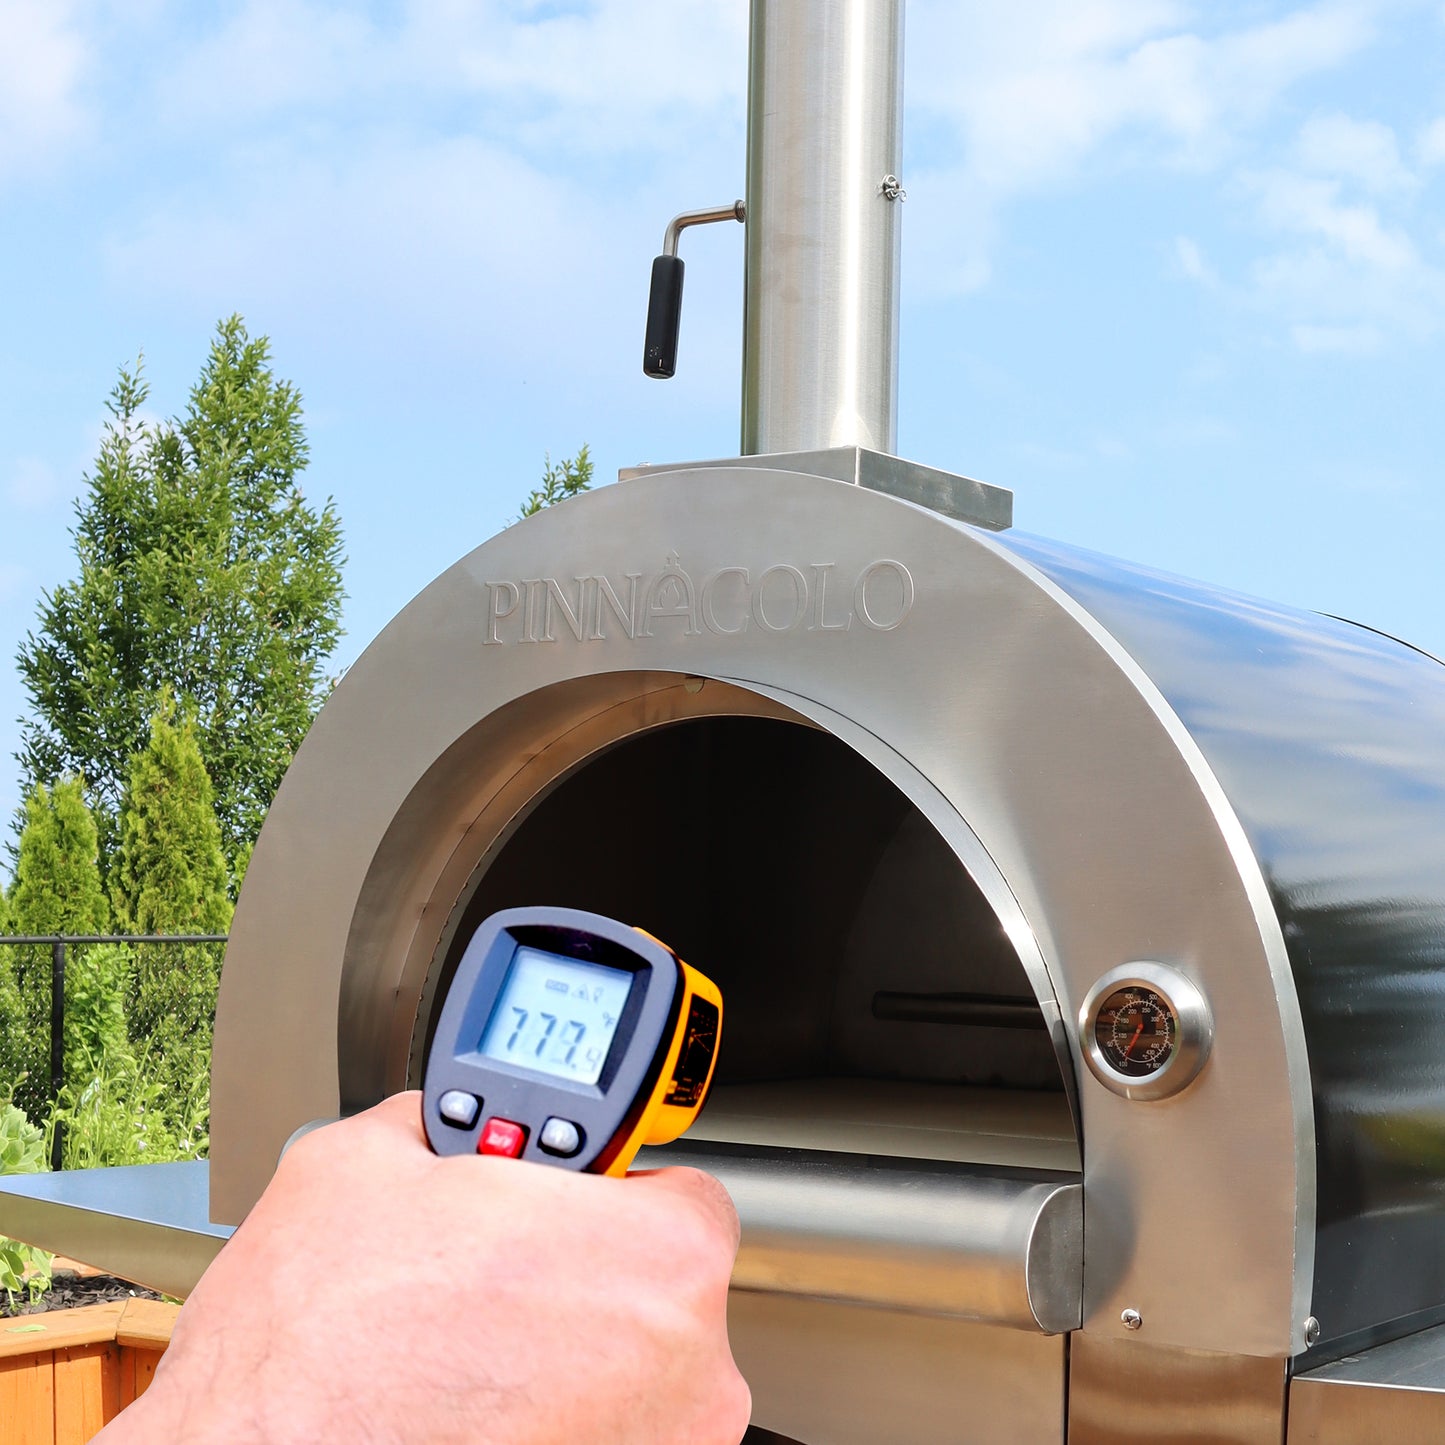 PINNACOLO | IBRIDO (HYBRID) Gas/Wood Pizza Oven With Accessories - PPO103 with temperature being checked 